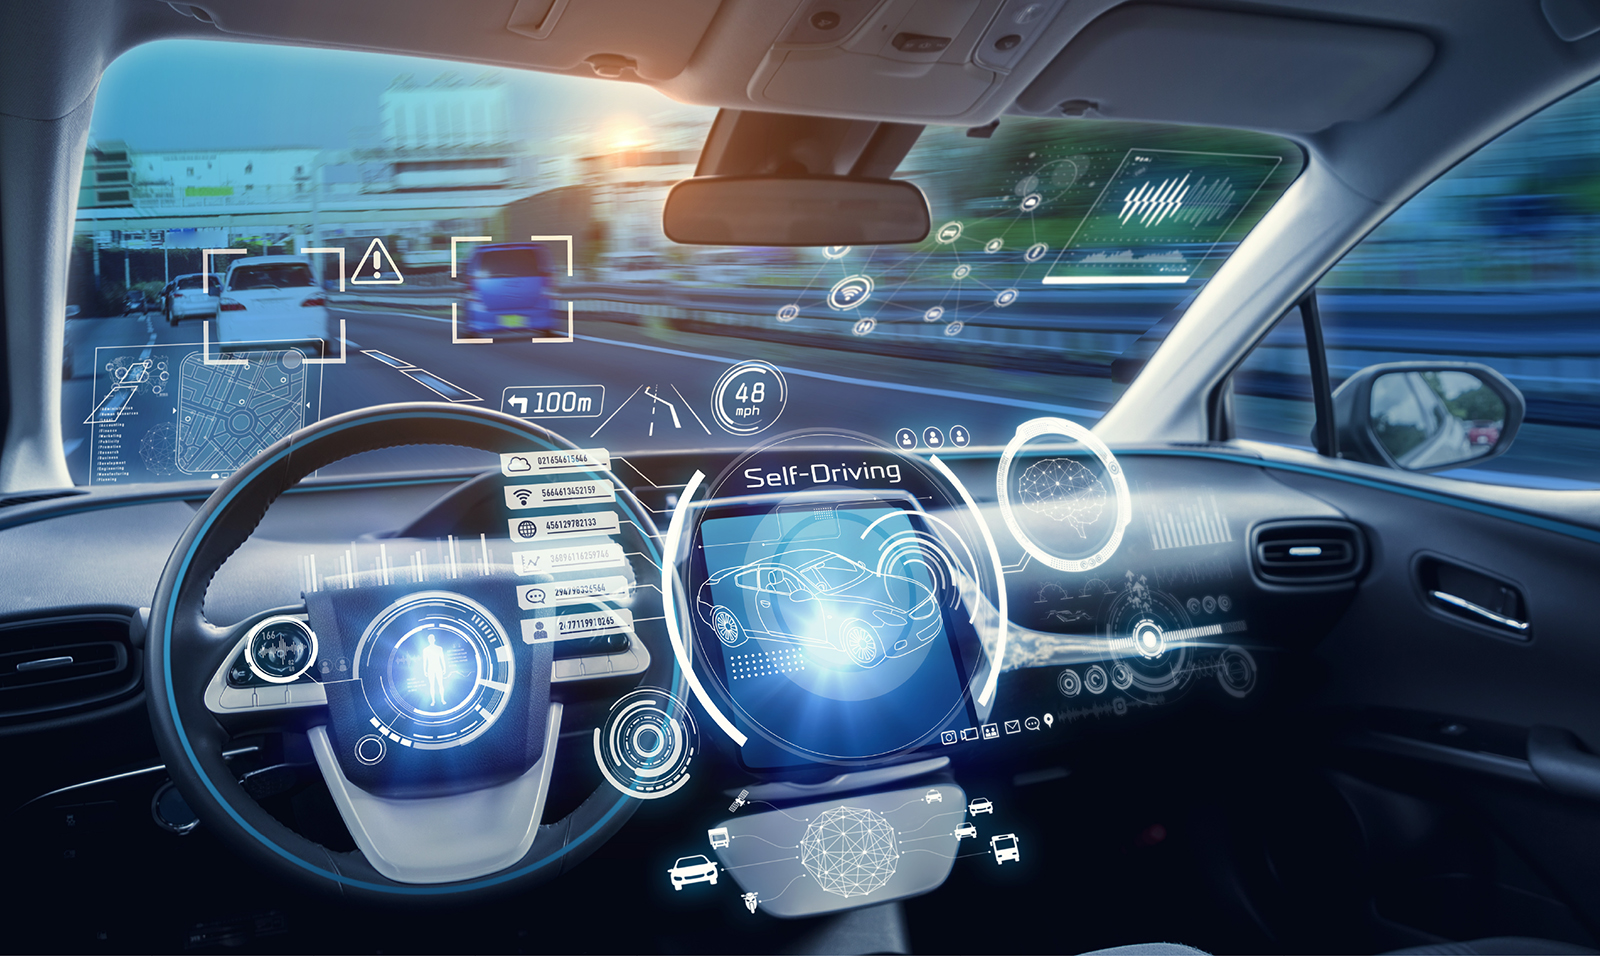 The dashboard of a self-driving automobile